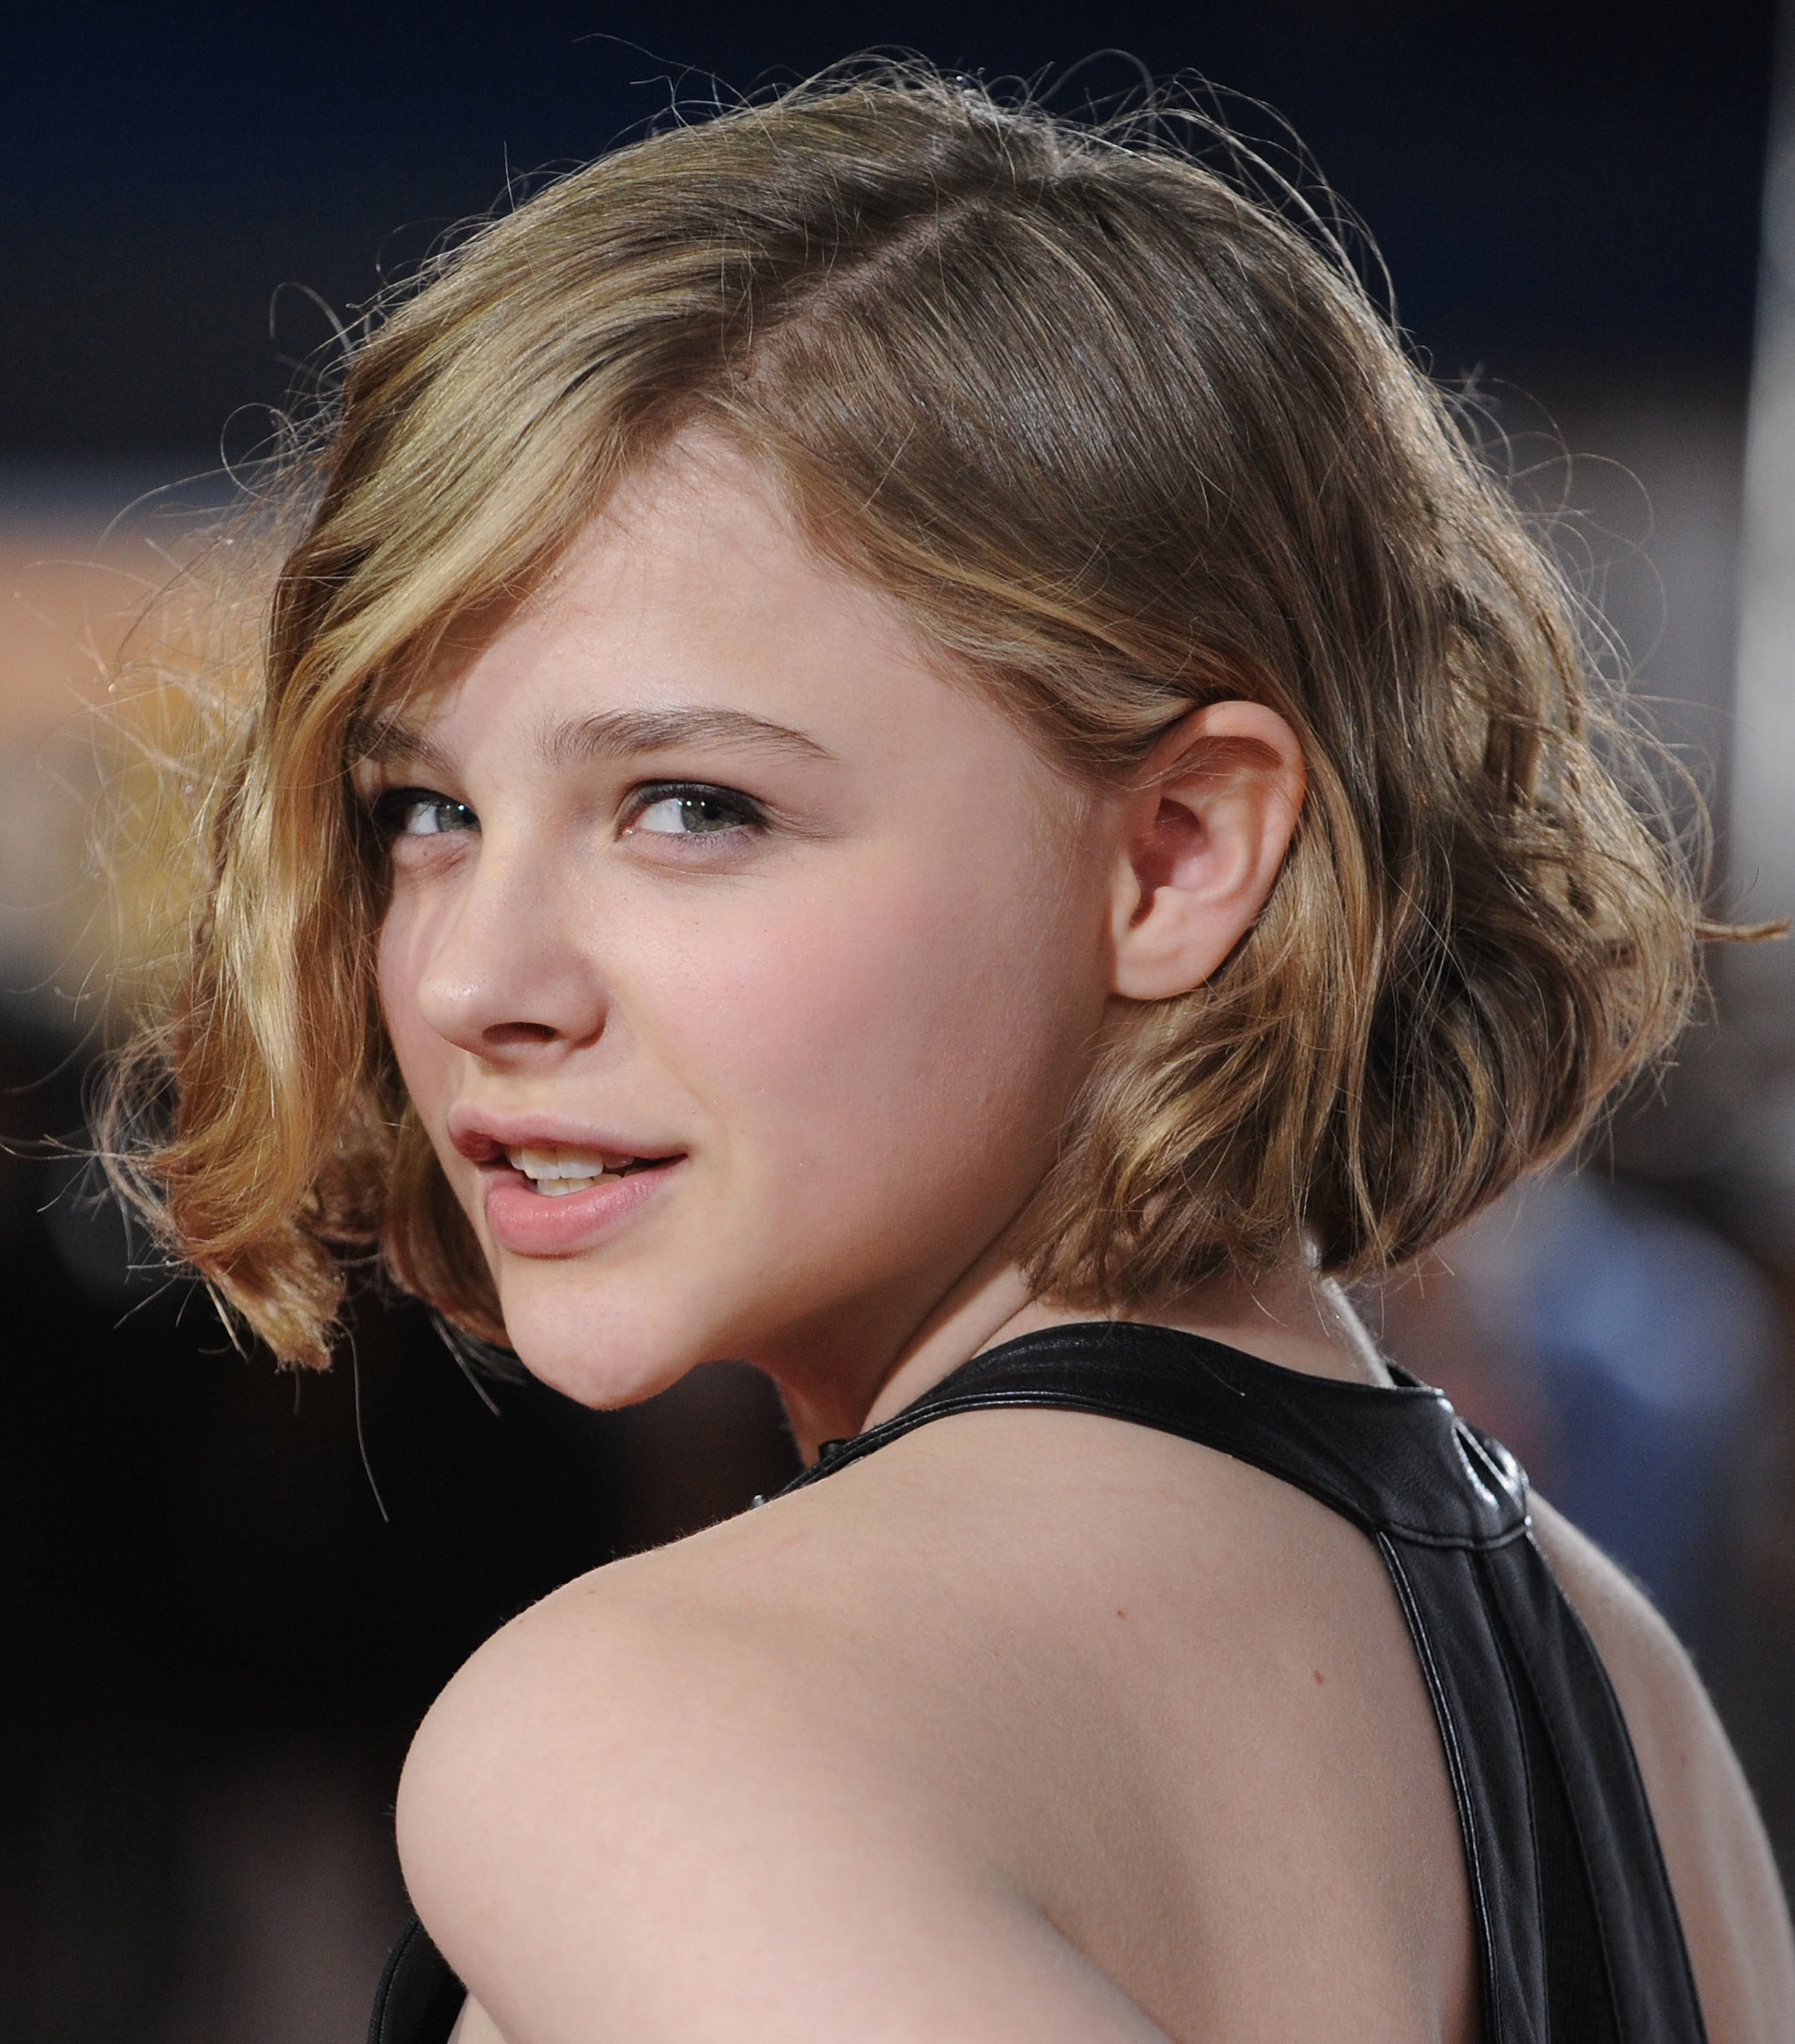 The kid behind Chloe Grace Moretz looks like a man in his 30's : r/funny